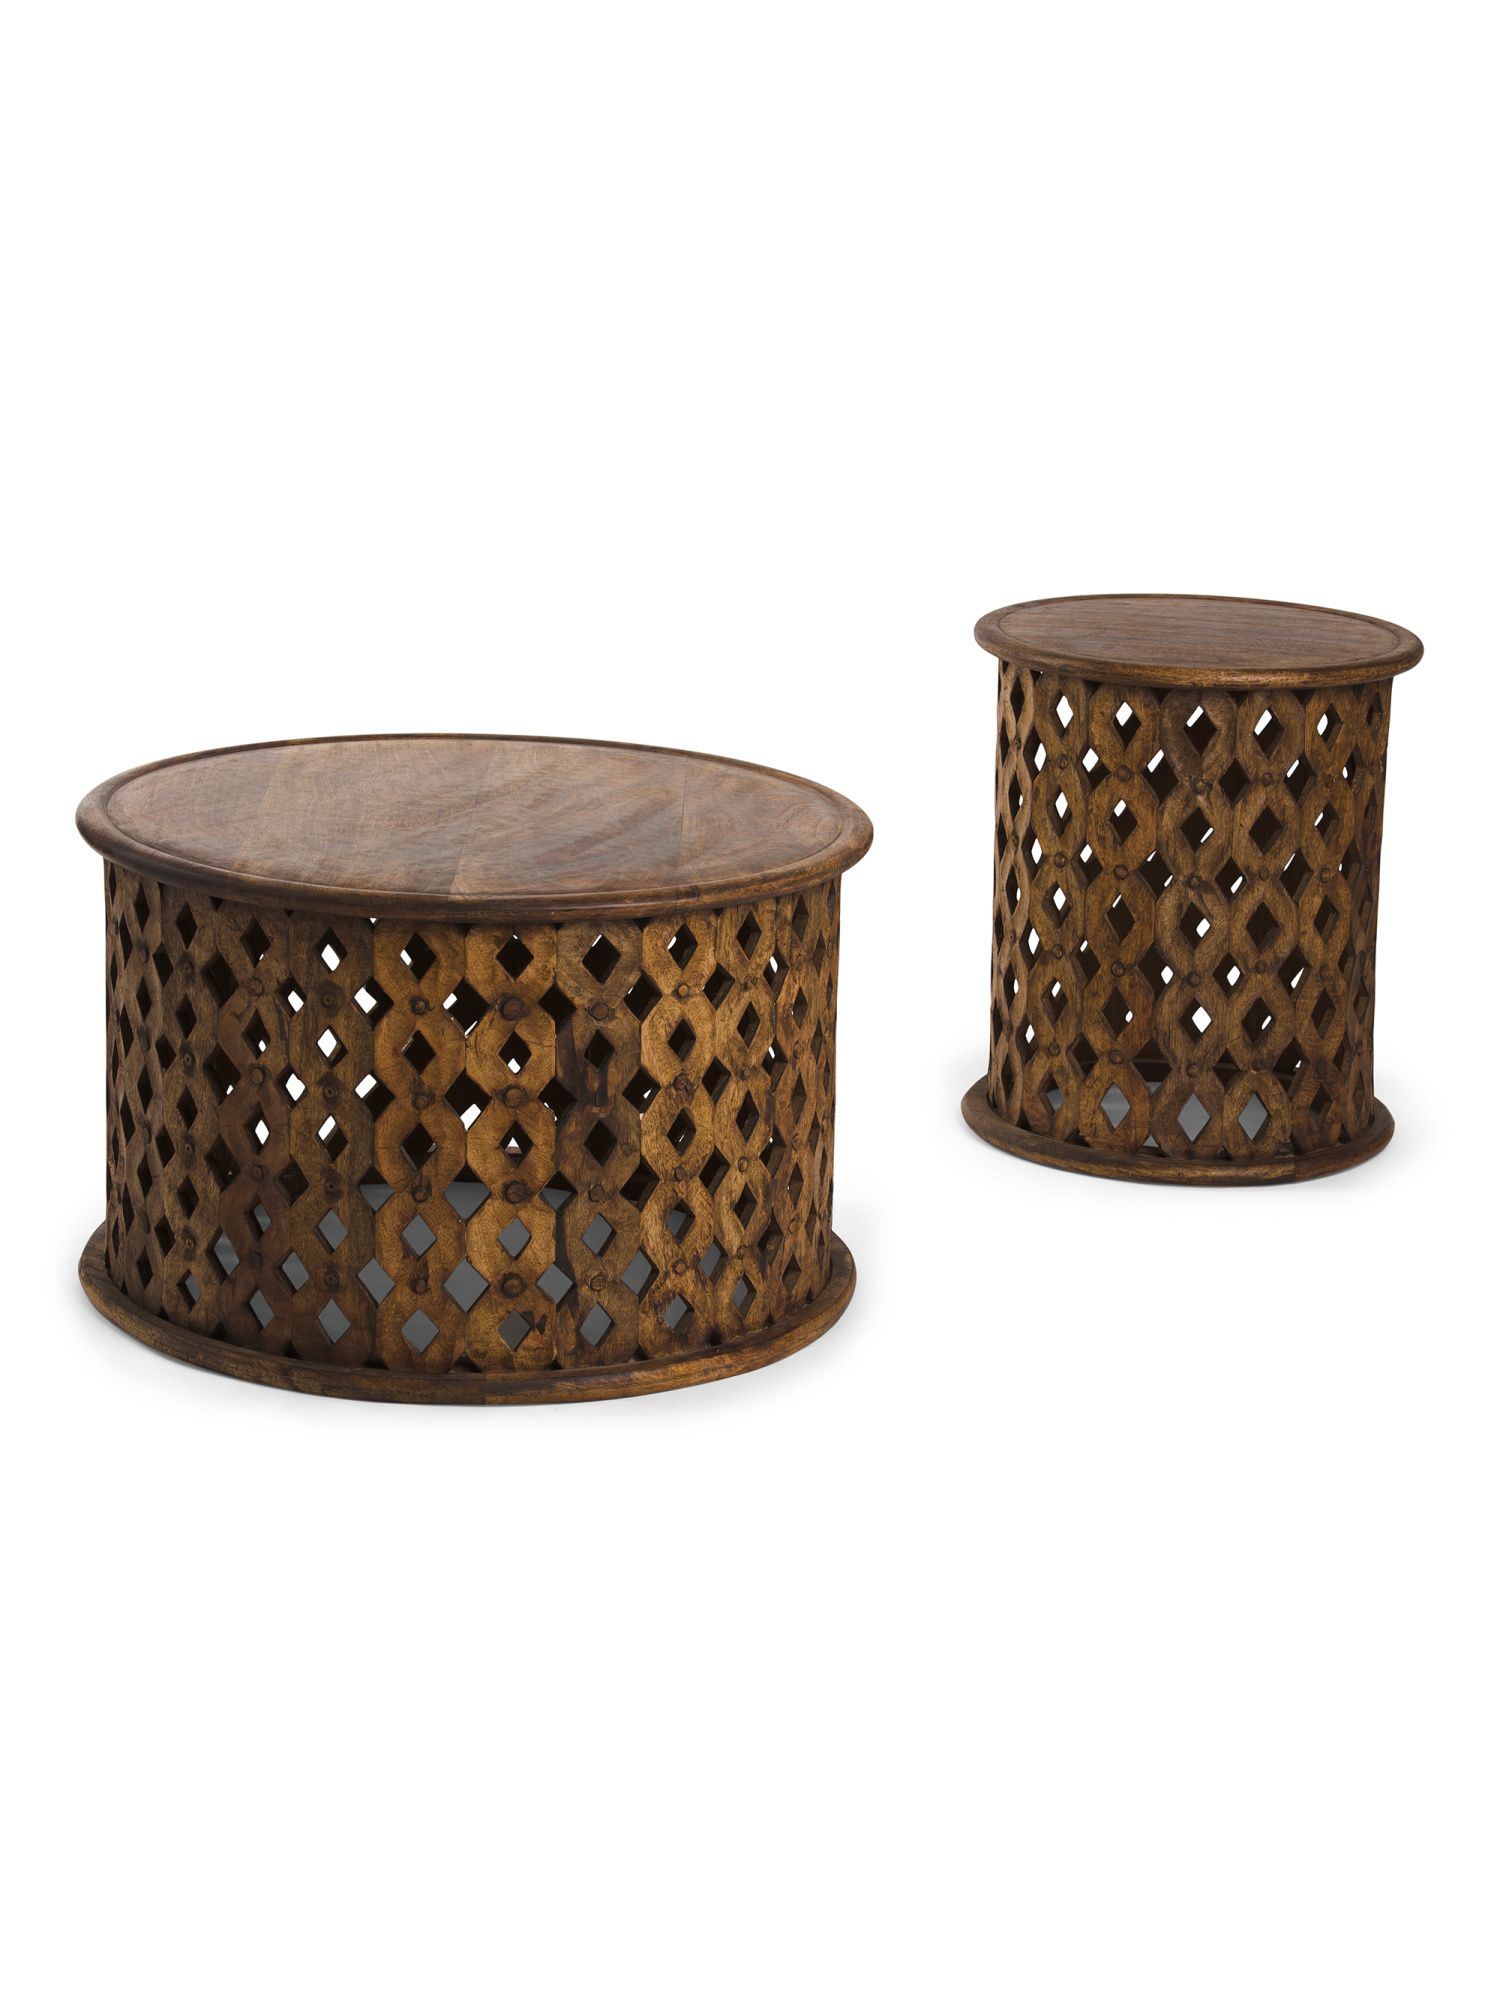 Carved Mango Wood Coffee And Accent Table Set | TJ Maxx